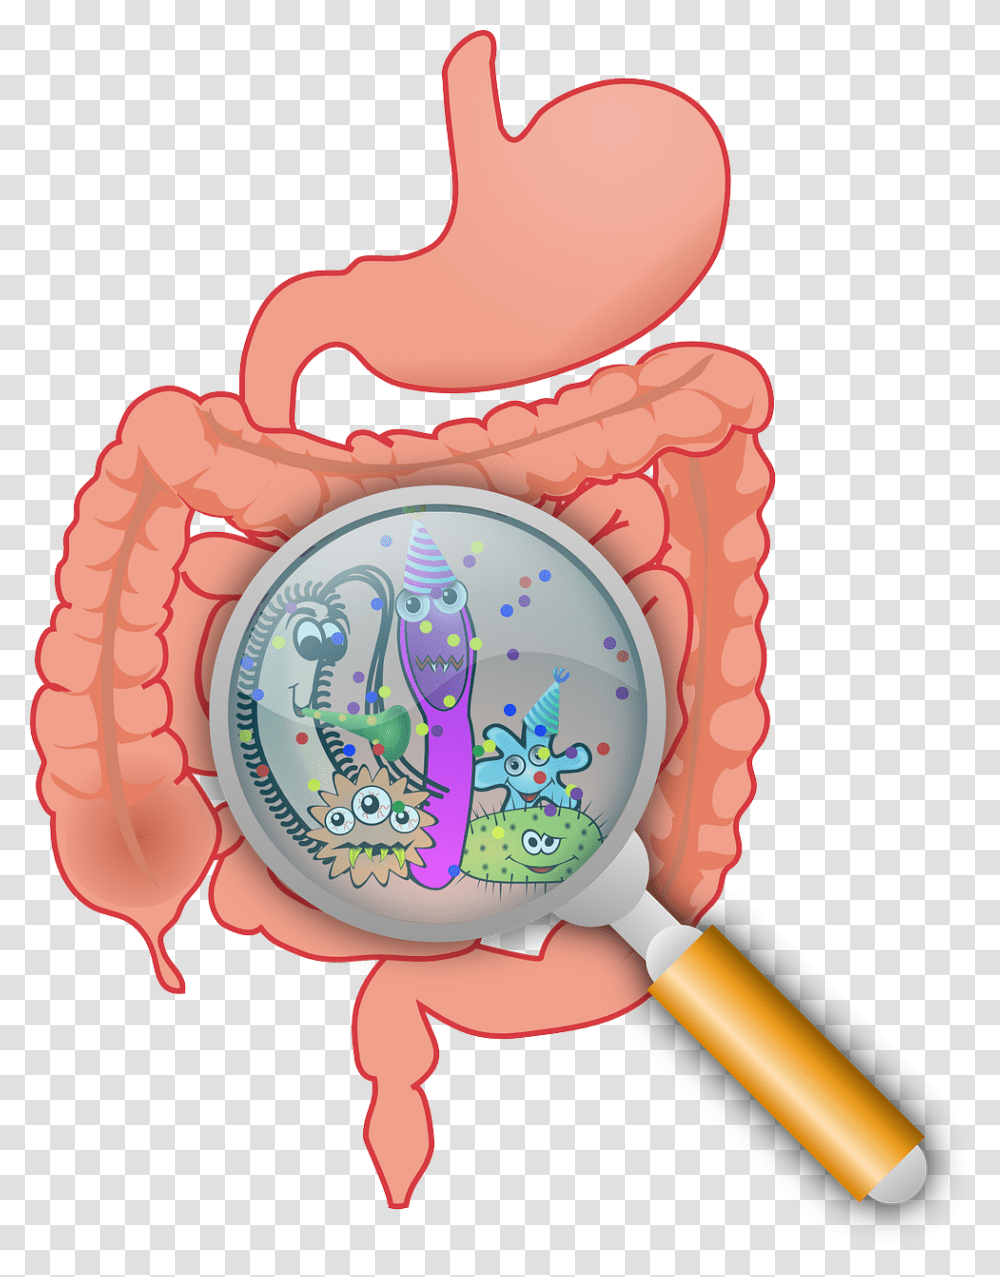 Cancer In The Digestive System Pearlpoint Nutrition Services, Blow Dryer, Appliance, Hair Drier, Birthday Cake Transparent Png